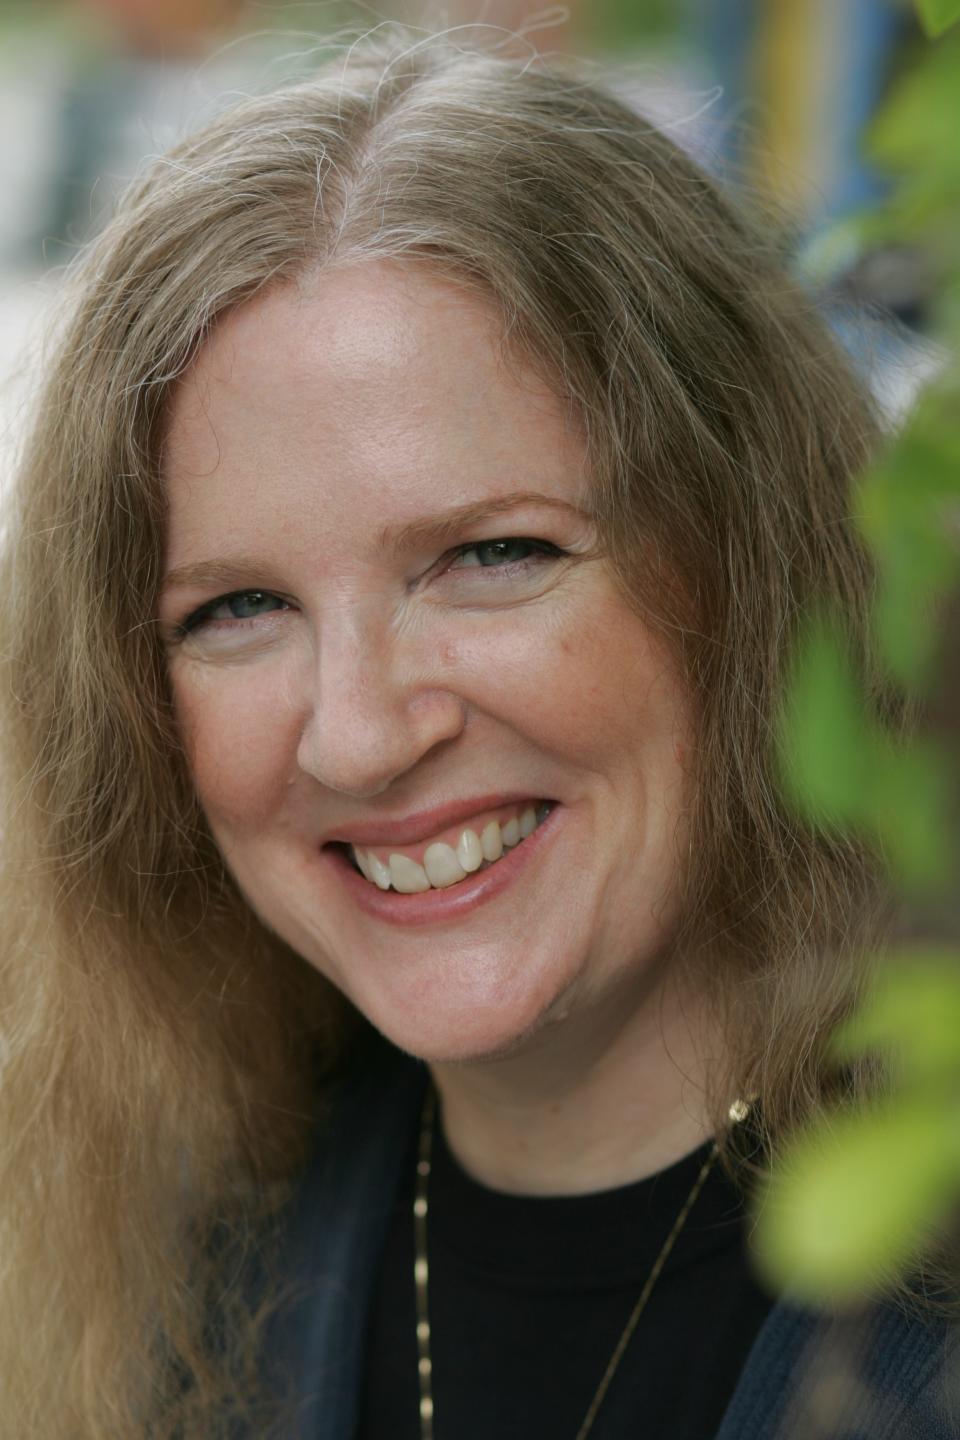 As an alumna of Indiana University, author Suzanne Collins is still considered a Hoosier.